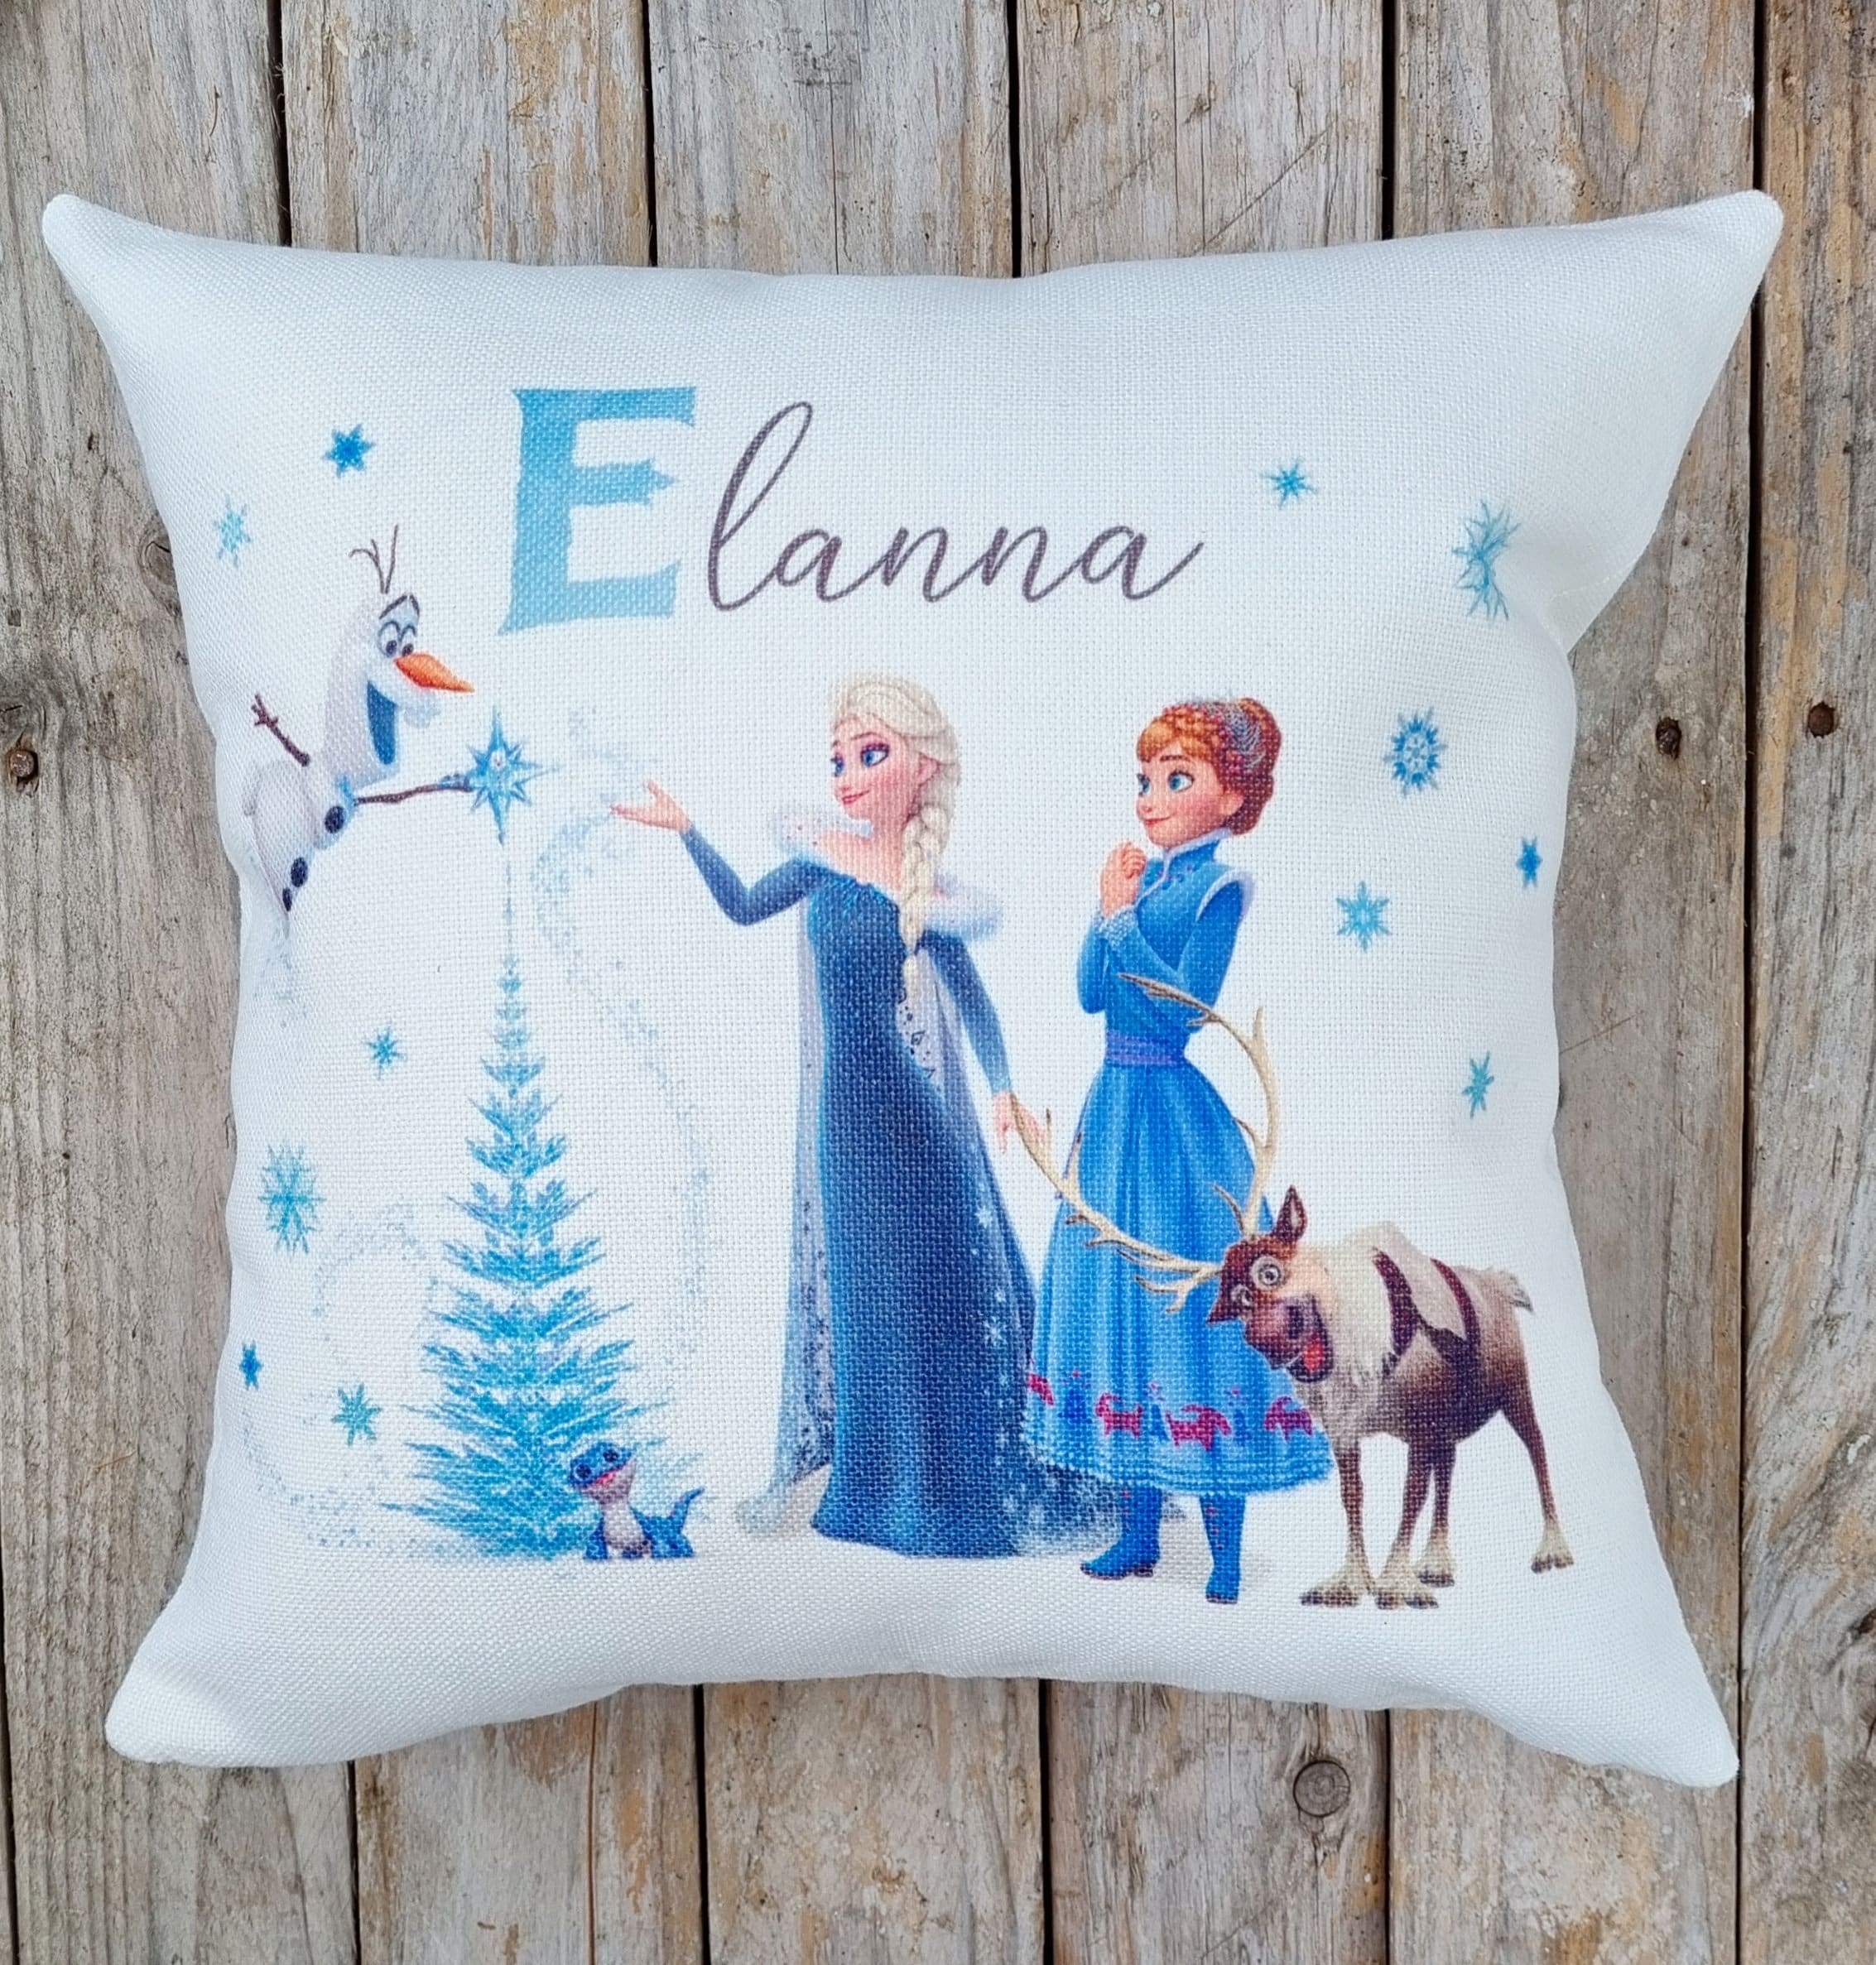 Flannel Throw Pillow/Sham Cushion Cover Disney's Frozen Characters